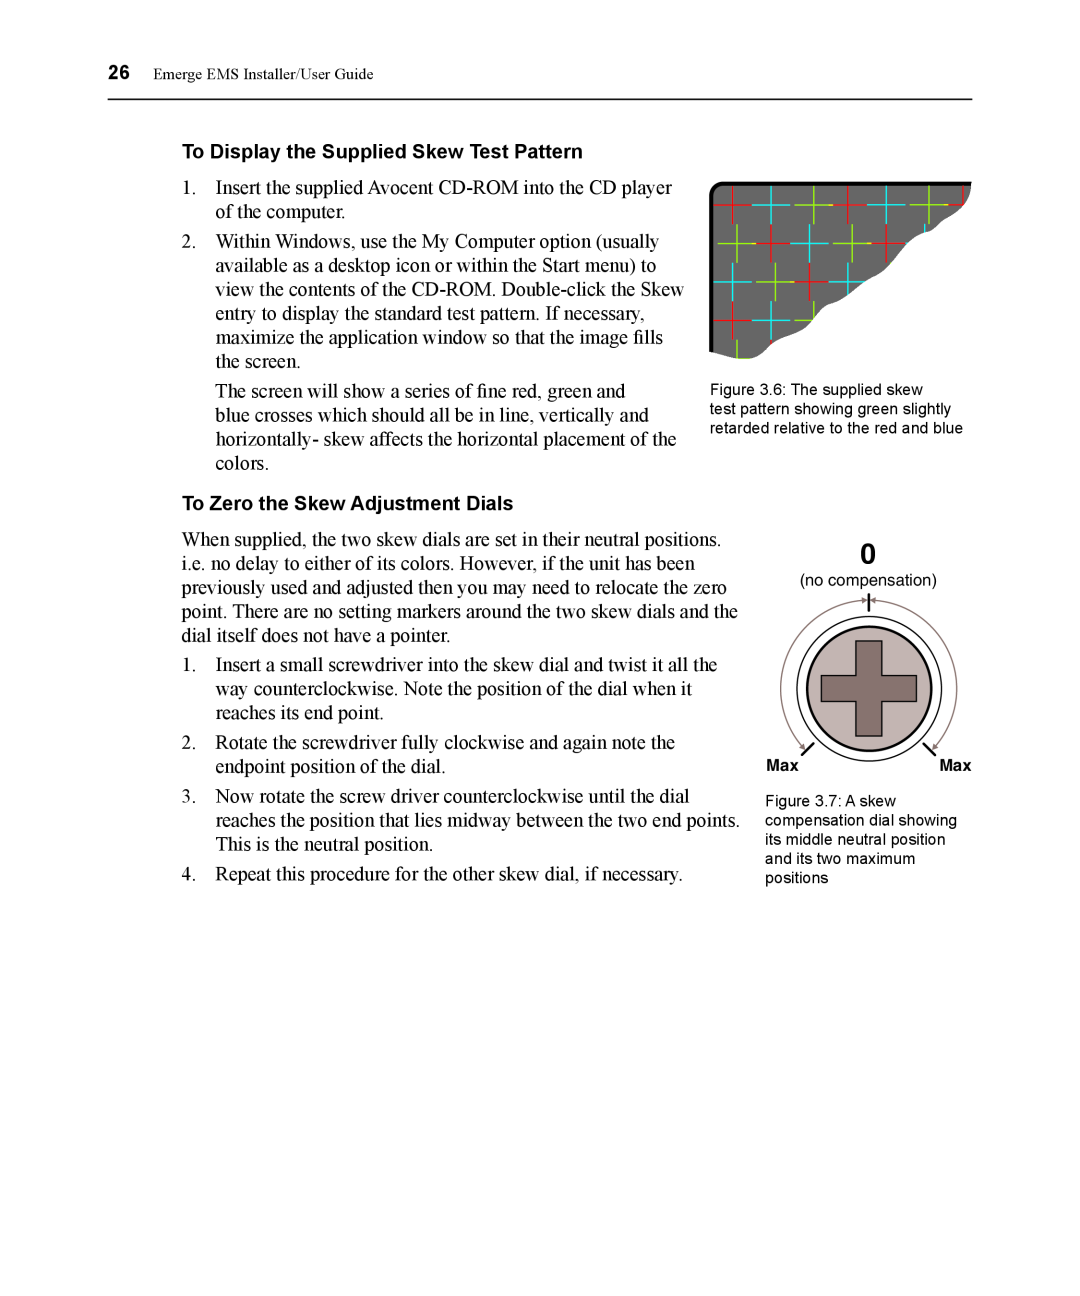 Avocent EMS1000P manual To Display the Supplied Skew Test Pattern, To Zero the Skew Adjustment Dials, MaxMax 